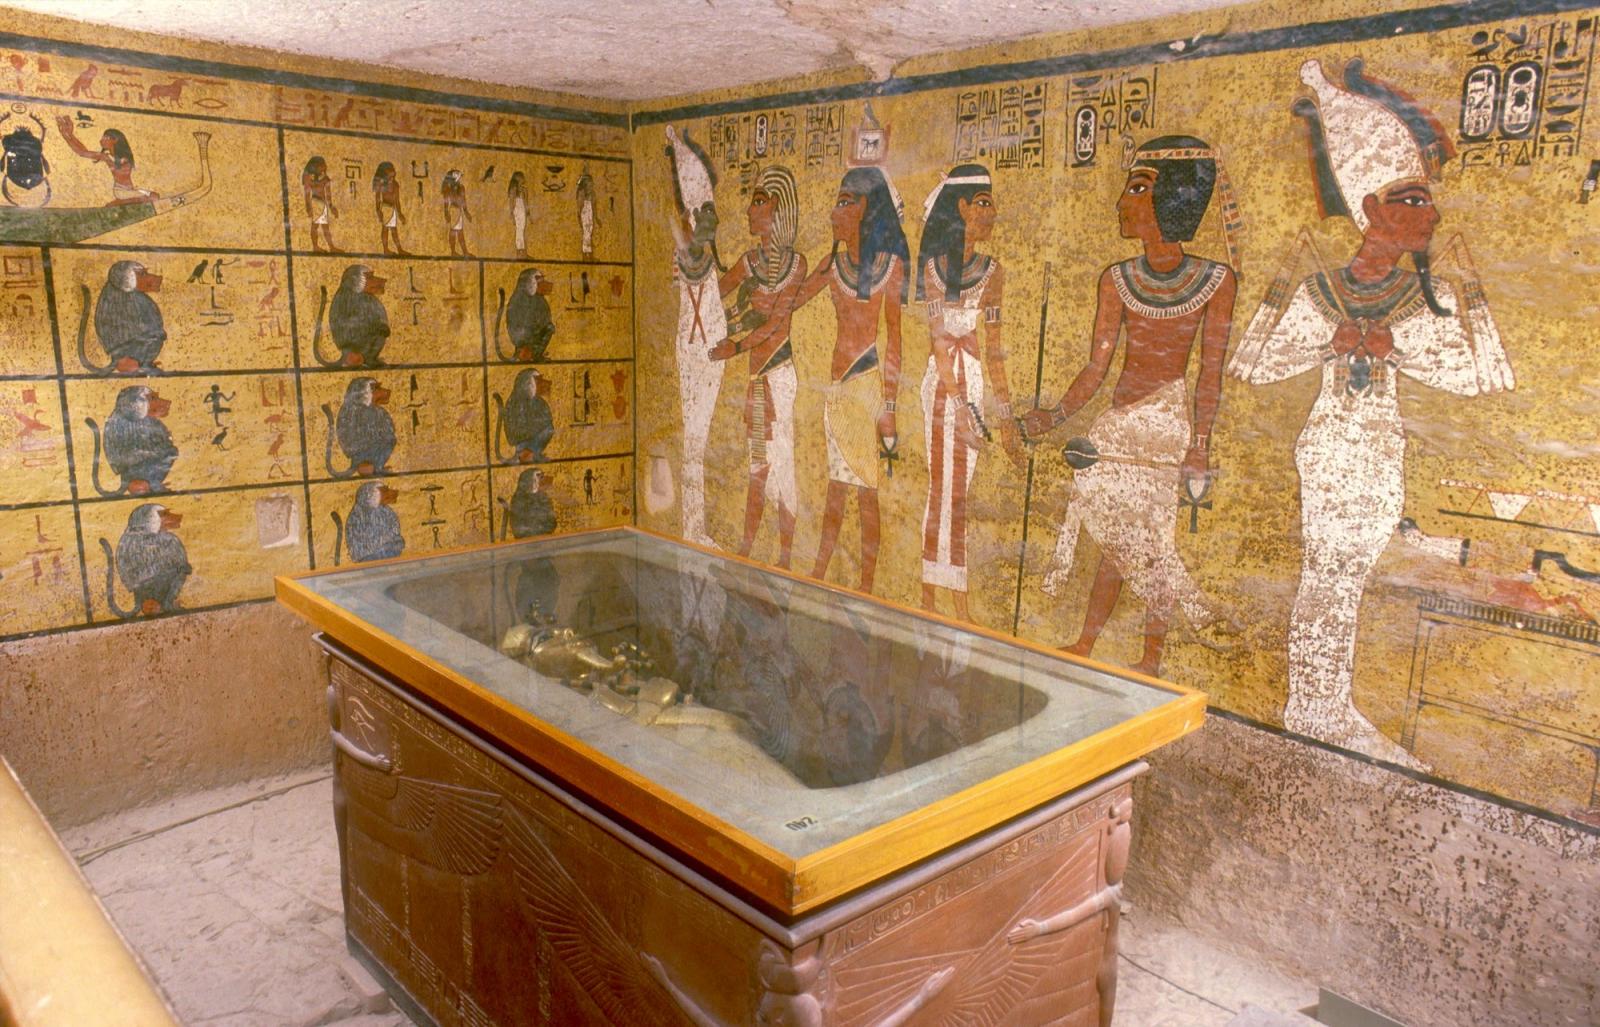 Imydwat, first hour: detail; Osiris, Tutankhamen and his ka; Nut greeting Tutankhamen; Tutankhamen as Osiris from Opening of the Mouth ritual; outer coffin in quartzite sarcophagus.